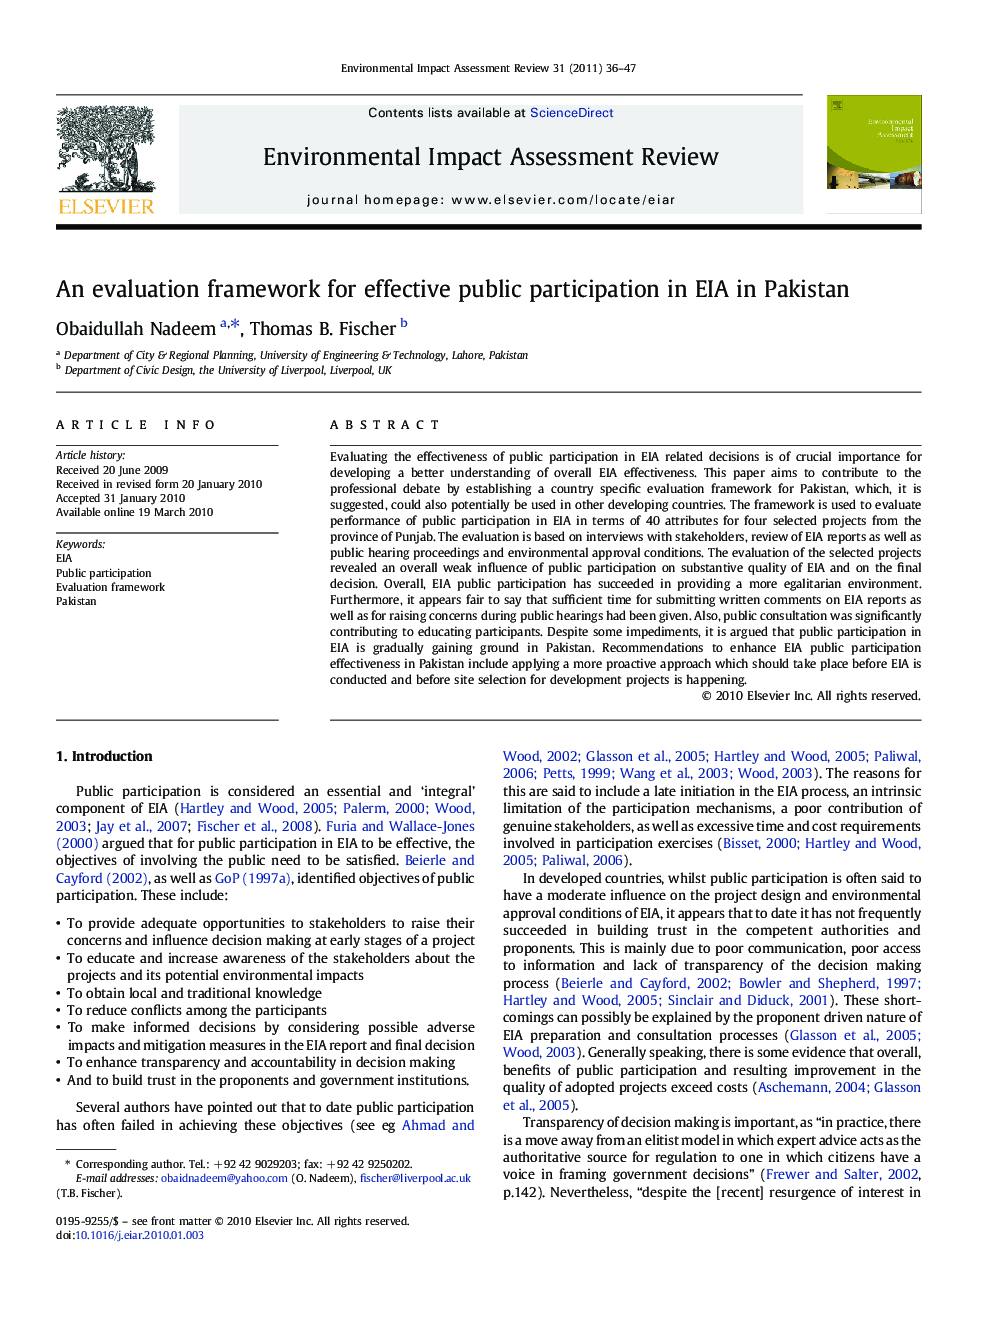 An evaluation framework for effective public participation in EIA in Pakistan